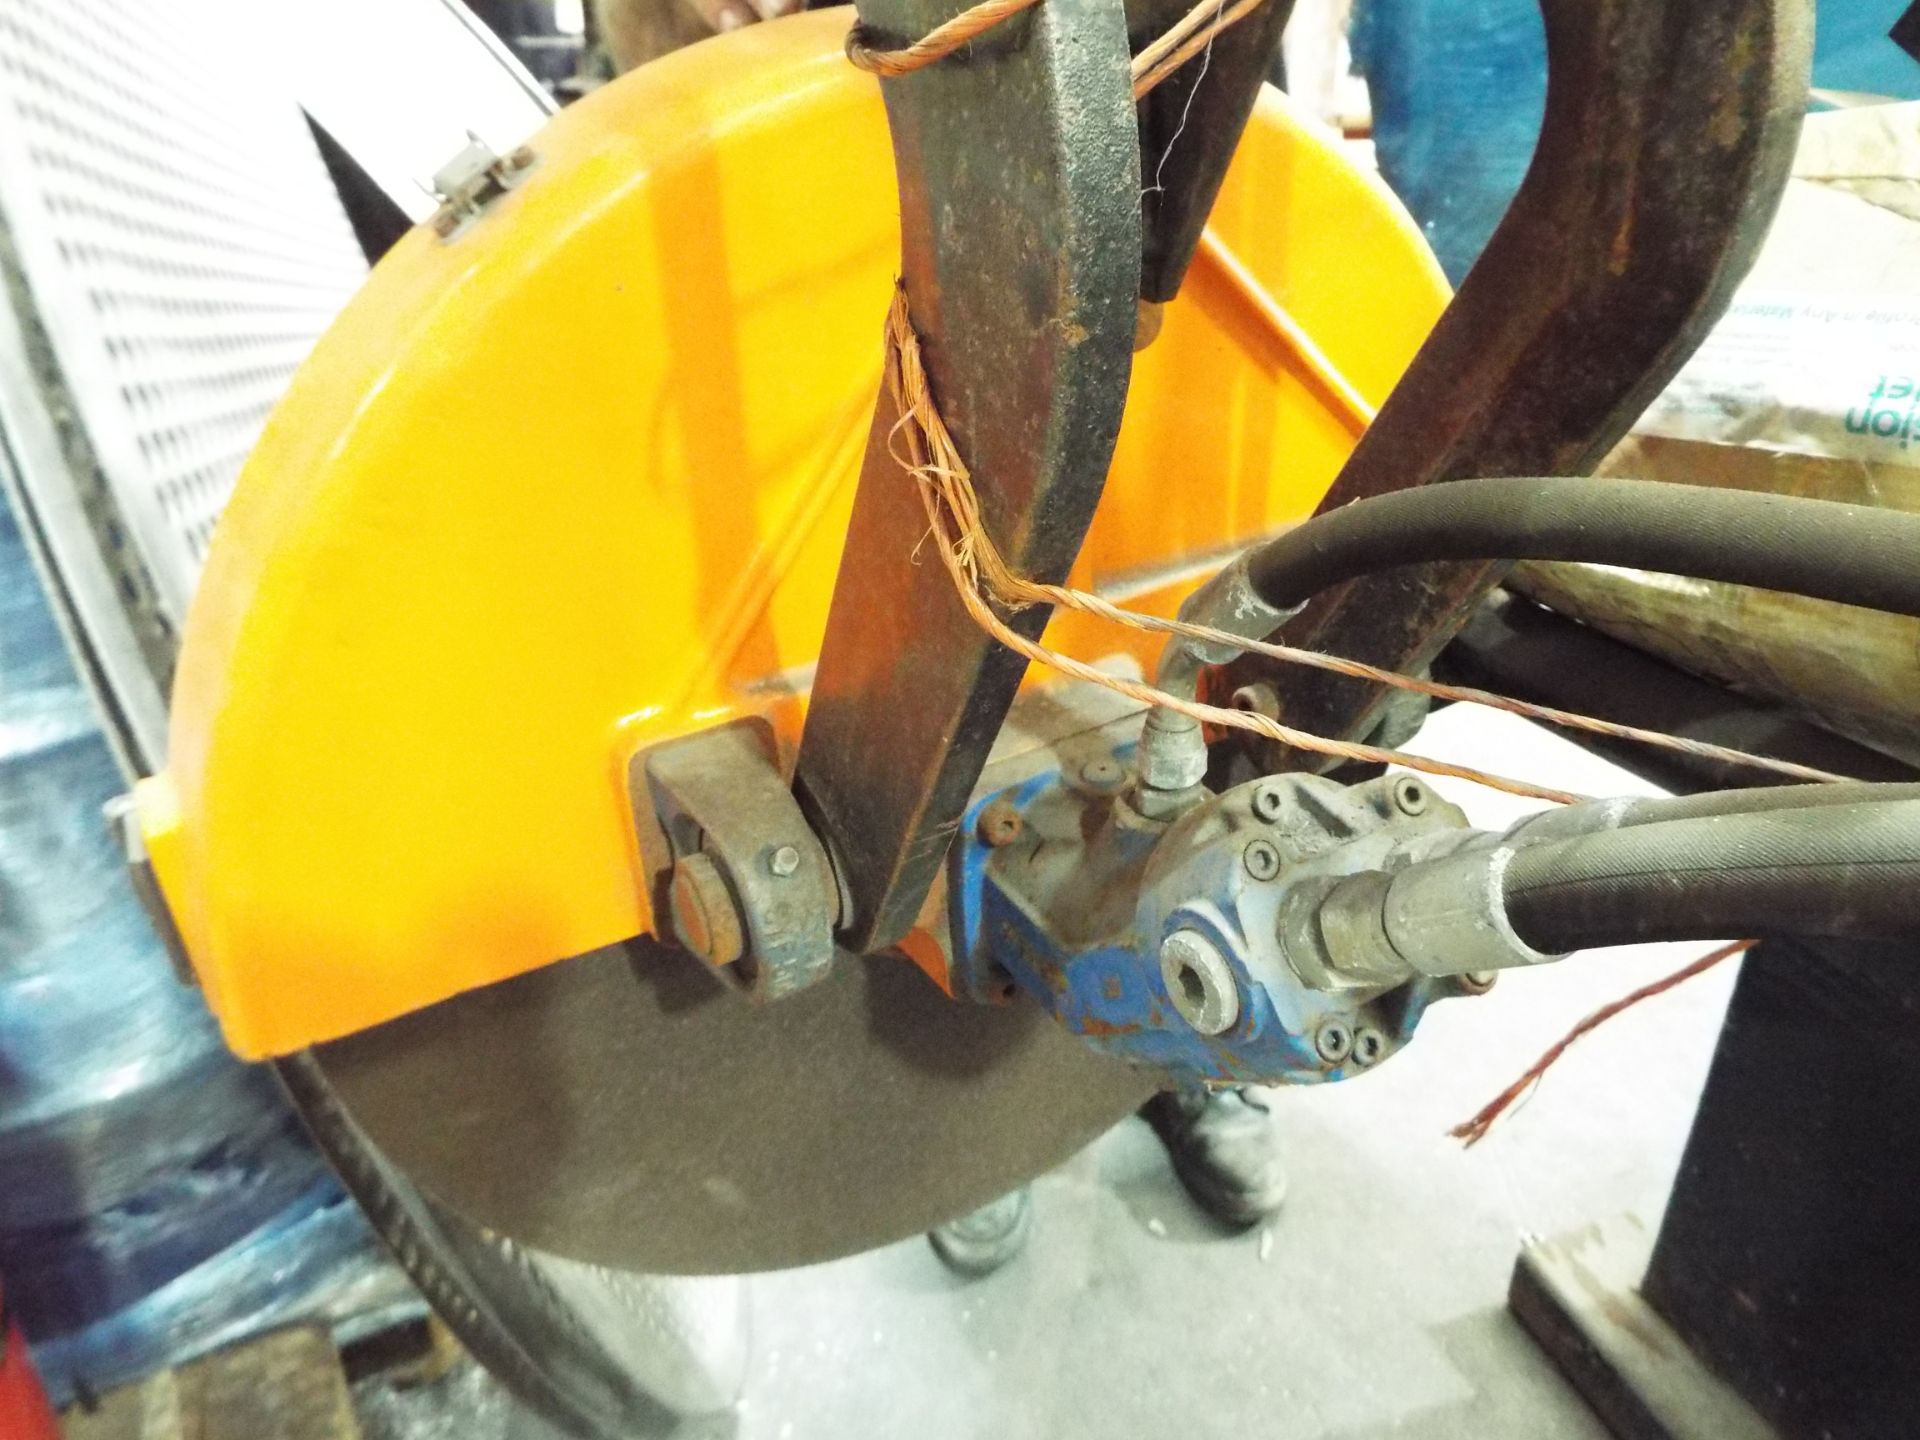 A W Bell MPS40 Manual Power Saw Complete With PCS 20 Clamping Attachment. - Image 6 of 22